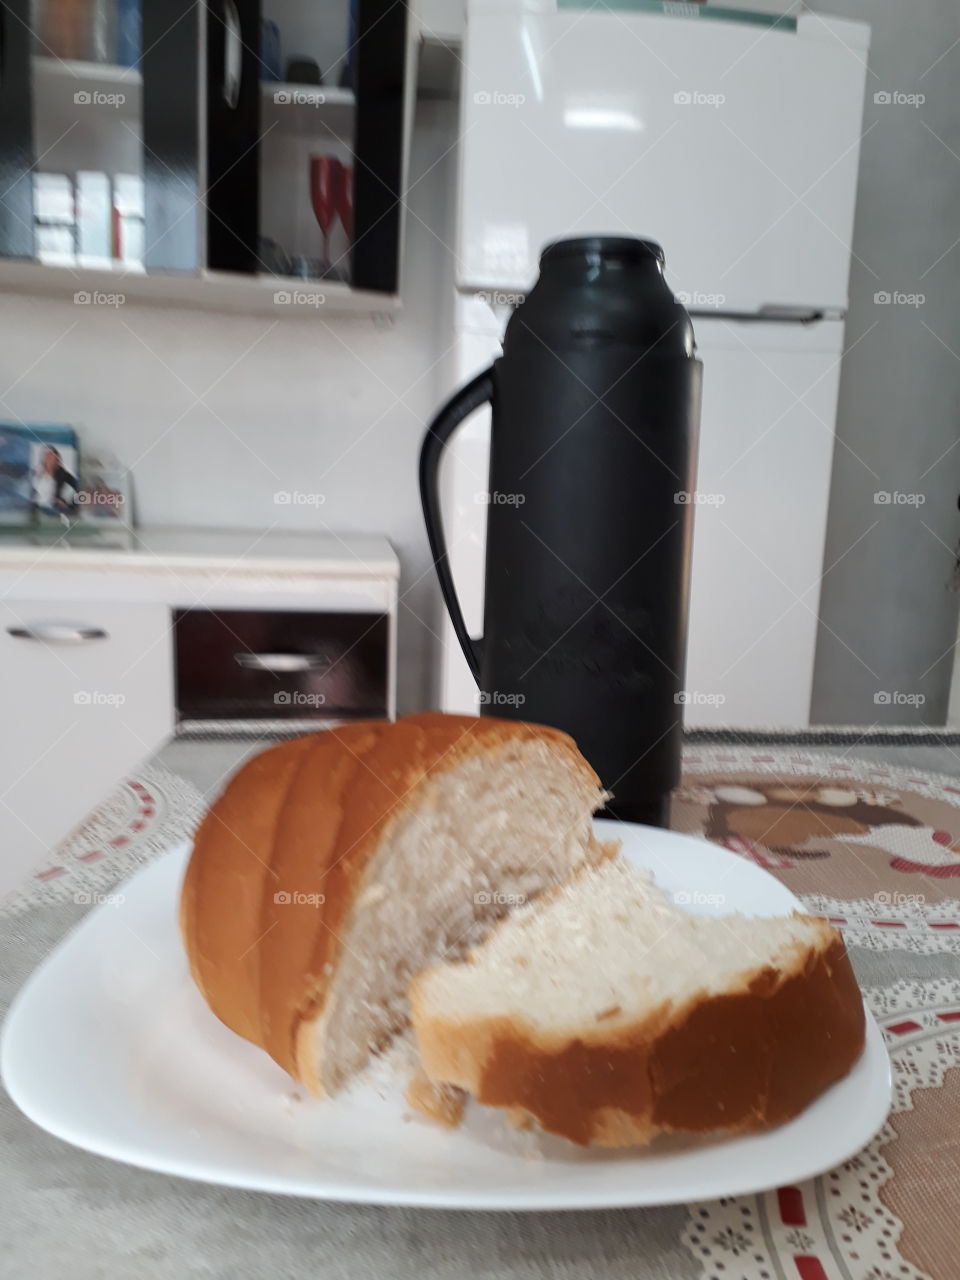 Bread with coffe